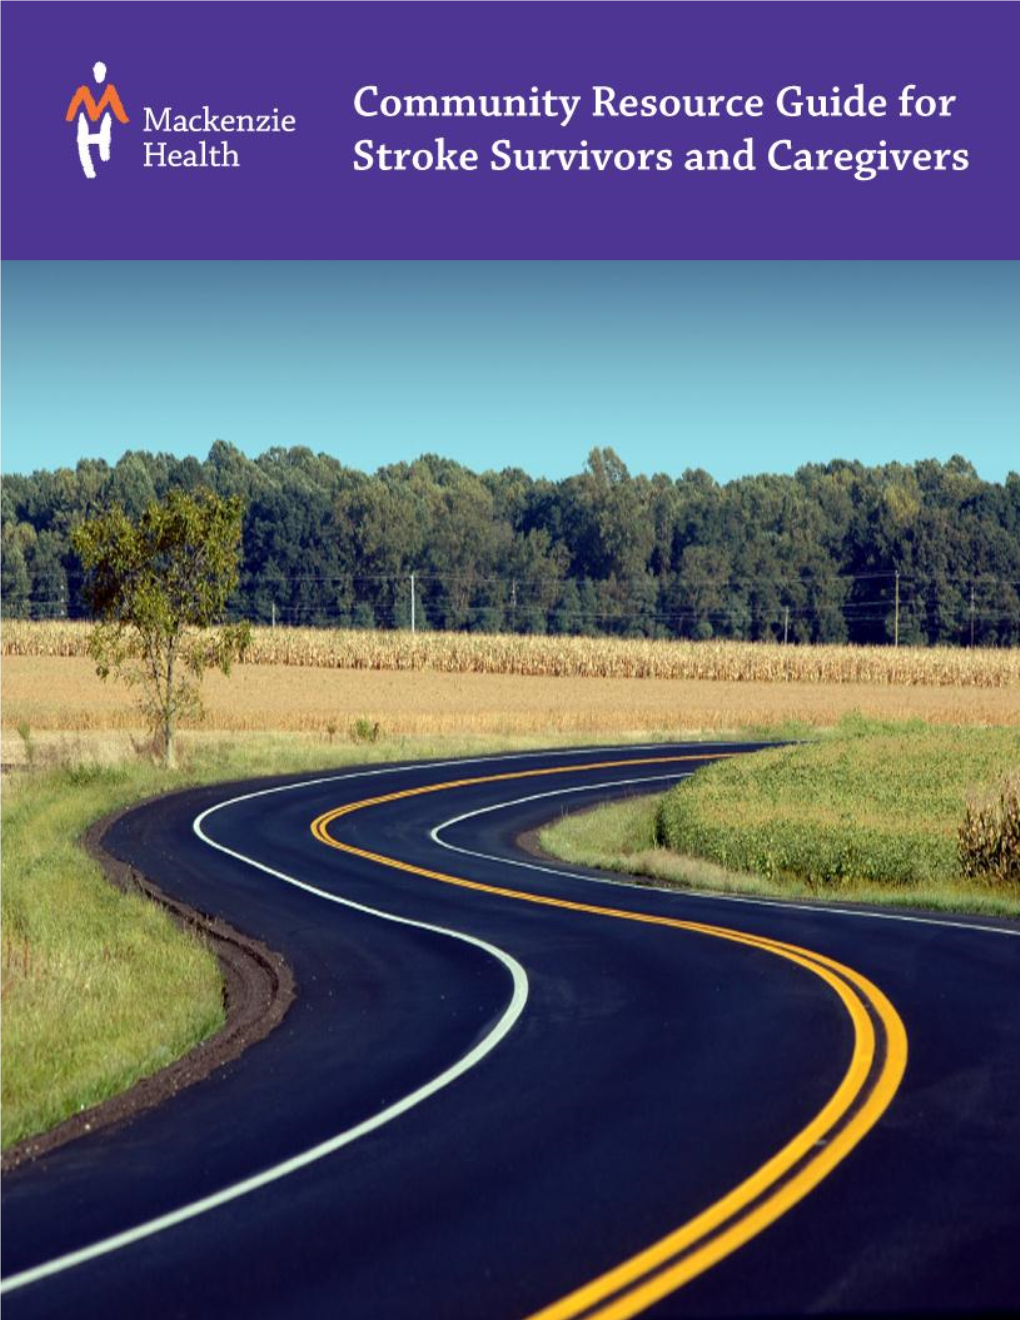 Community Resource Guide for Stroke Survivors and Caregivers